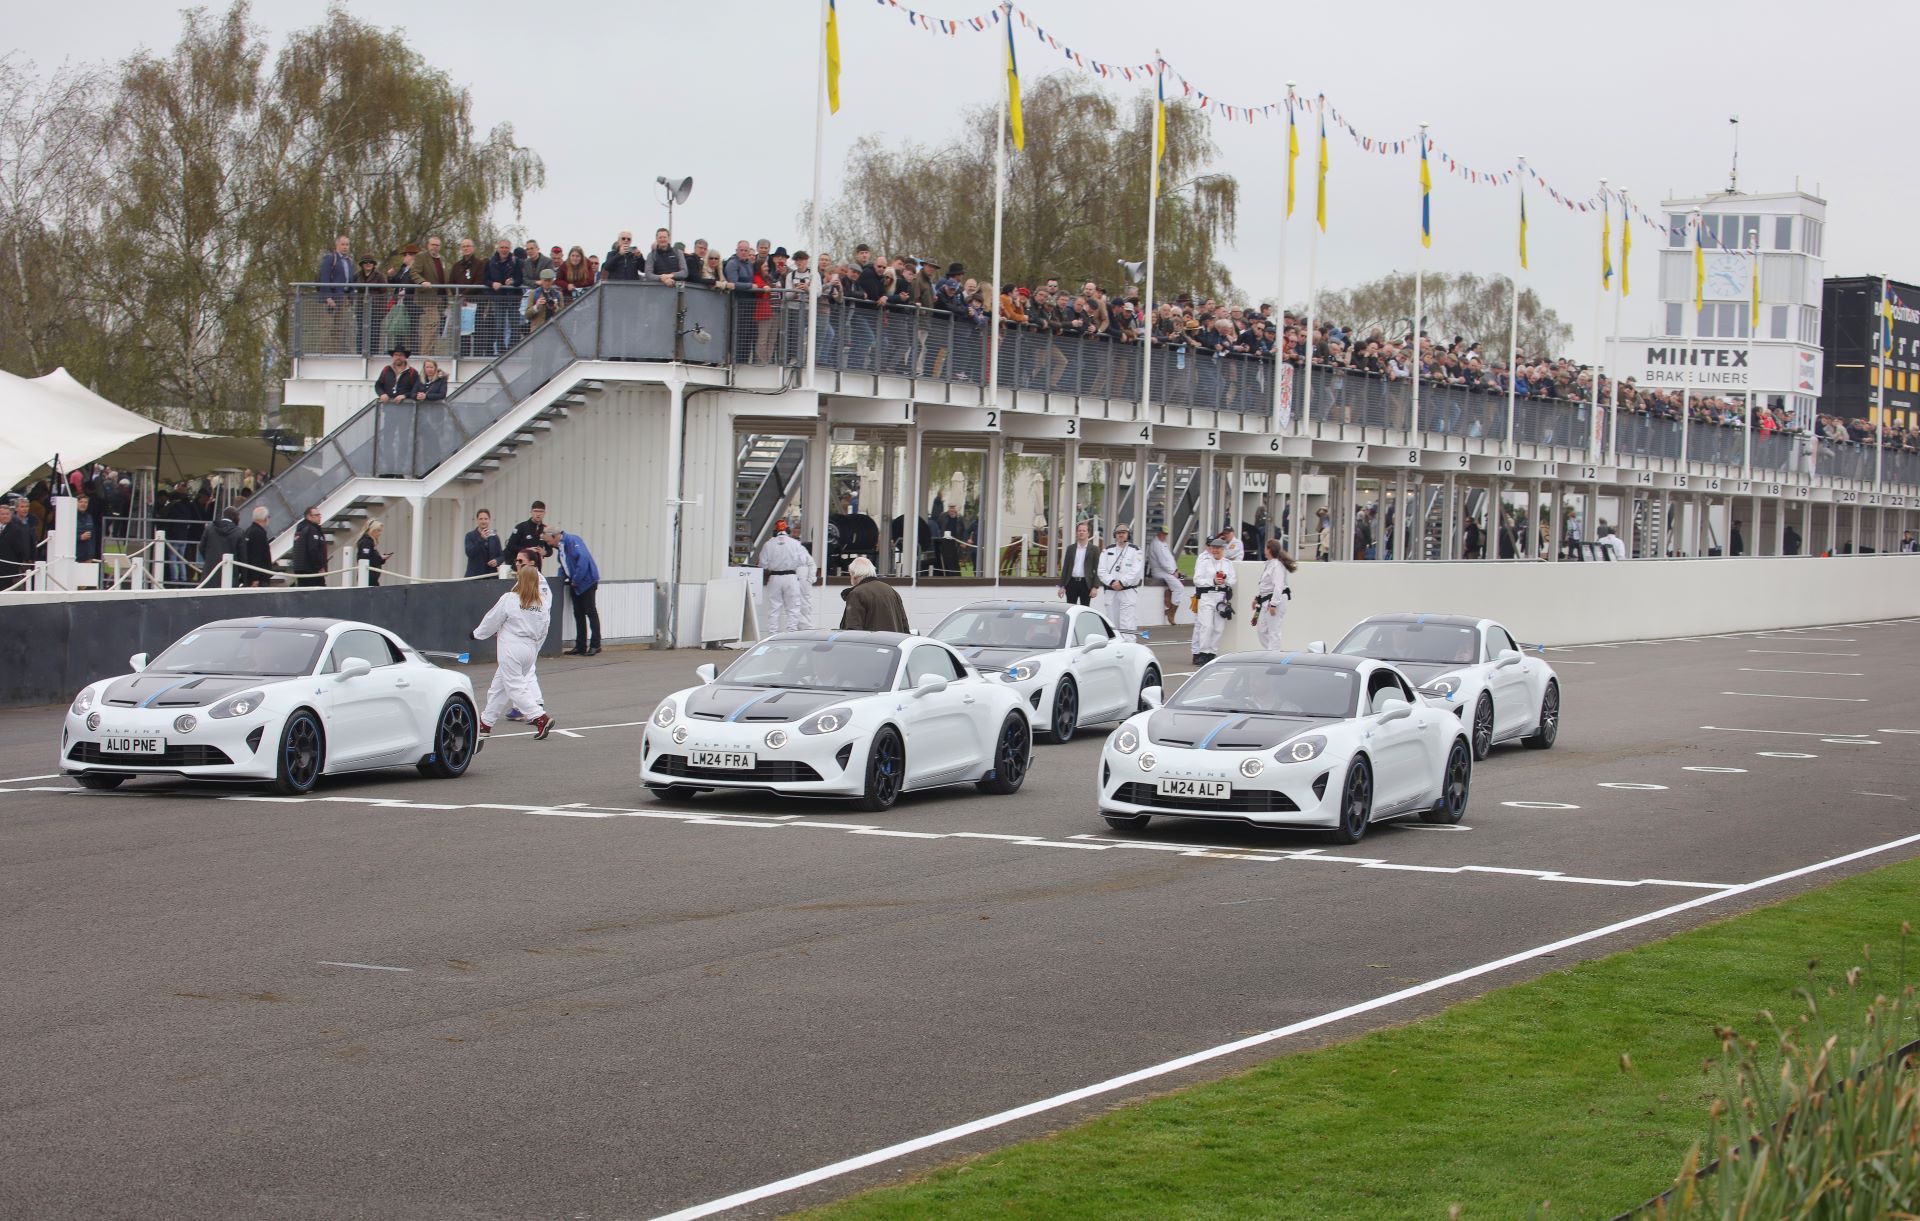 Alpine takes the lead at the 81st Goodwood Members Meeting